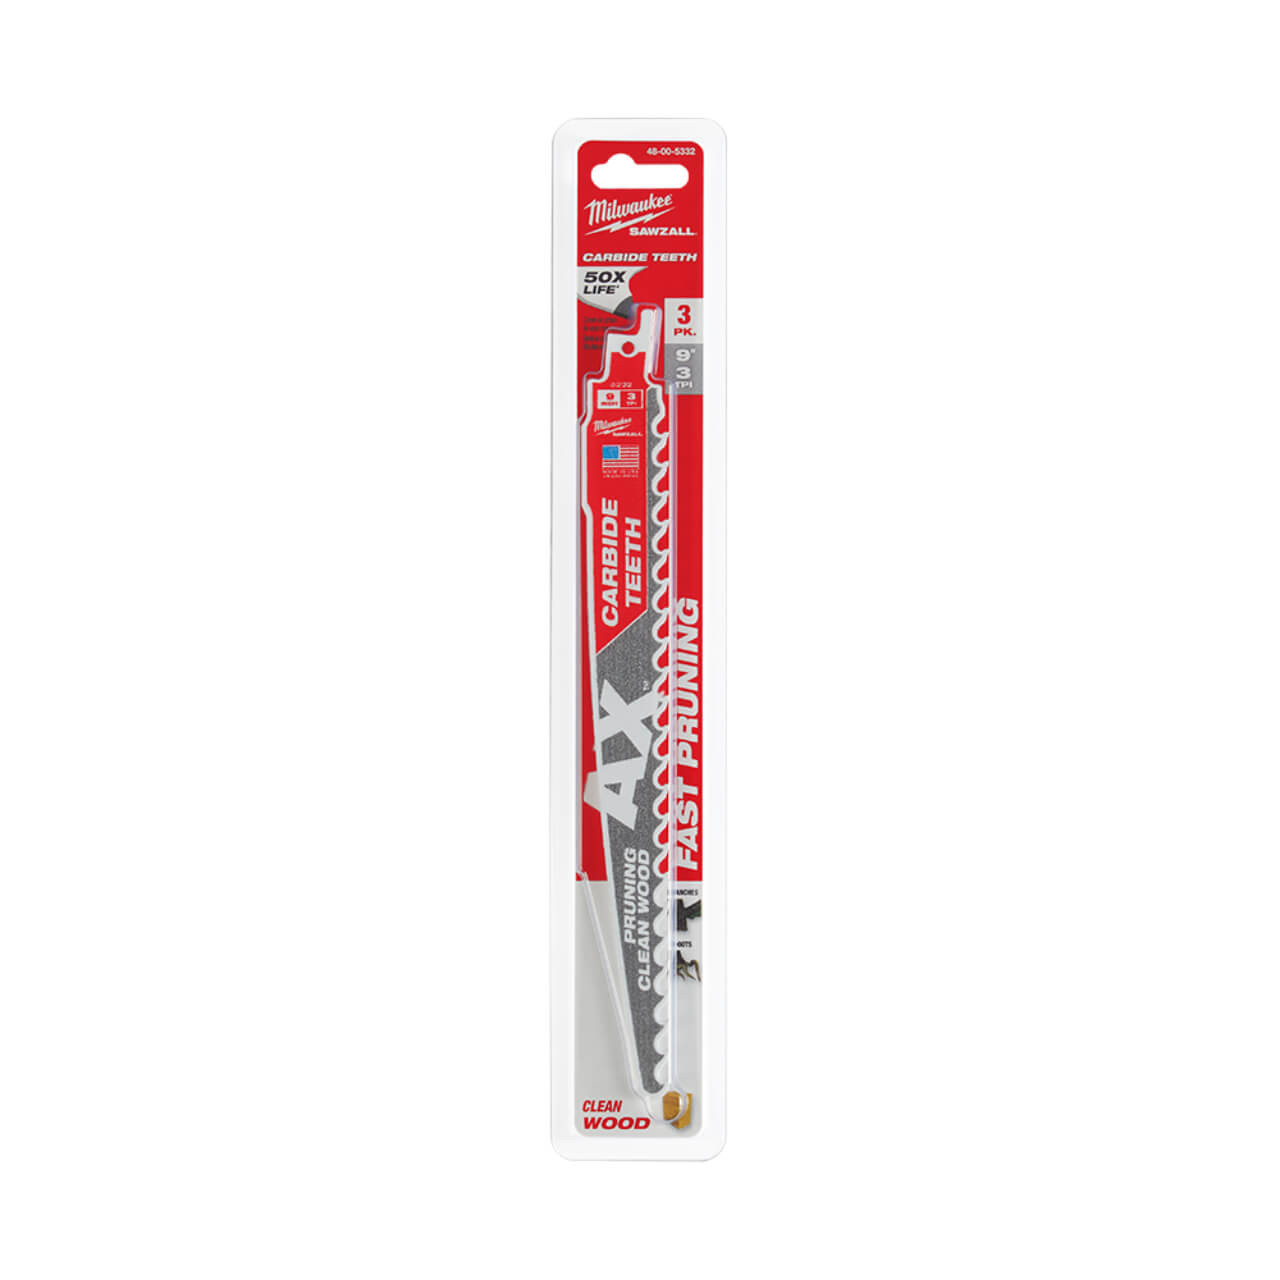 Milwaukee Sawzall 225mm The Ax With Carbide Teeth or Pruning & Clean Wood Reciprocating Saw Blade 3pk